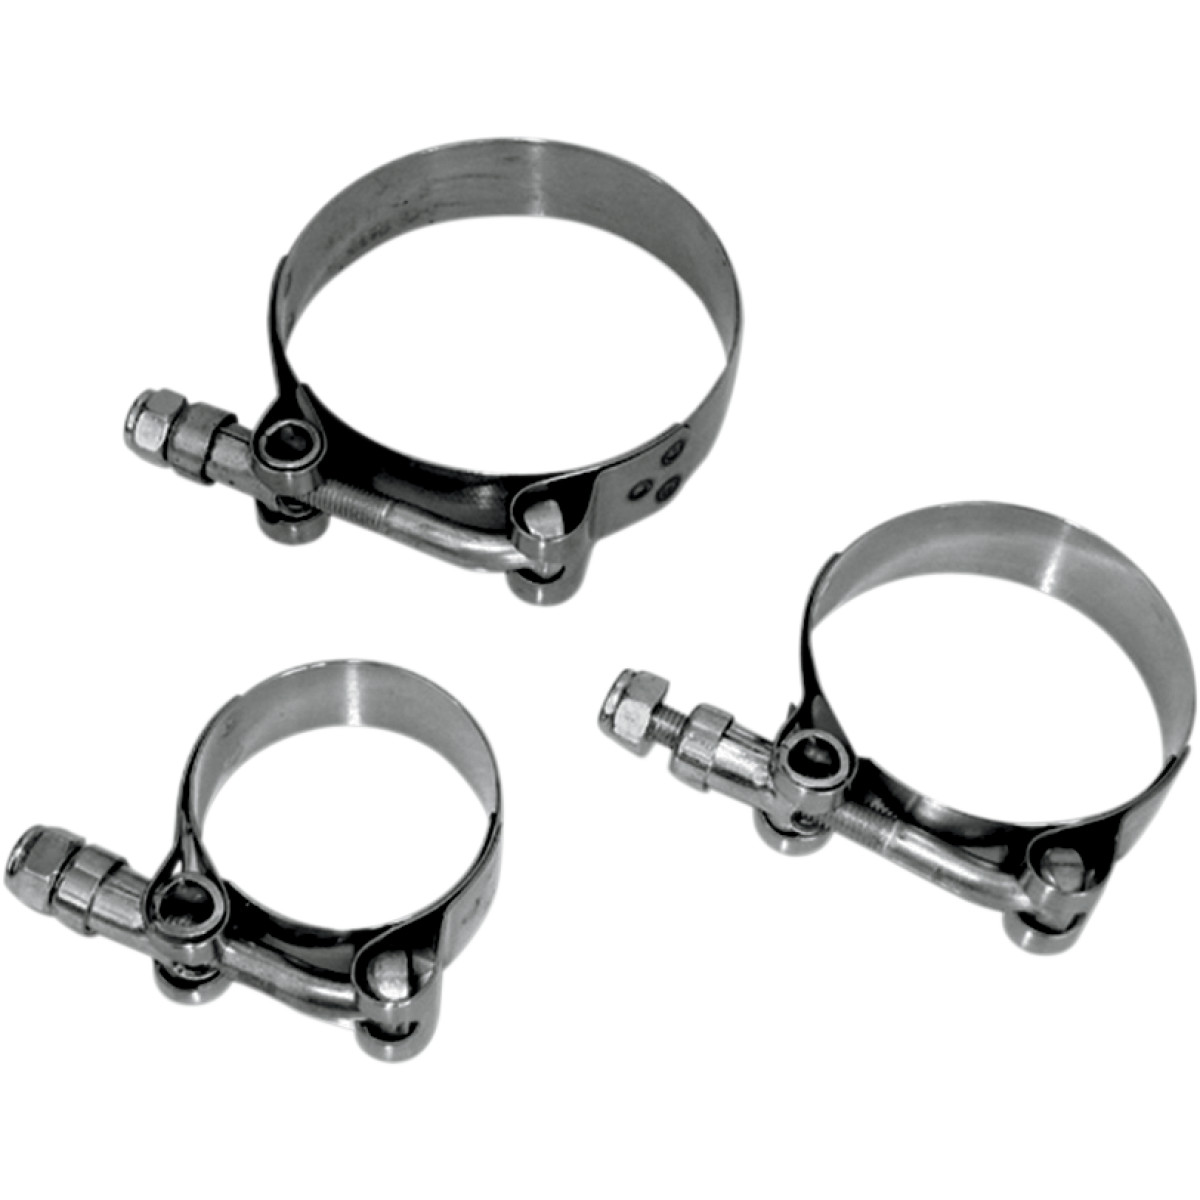 HARLEY DAVIDSON EXHAUST PIPE CLAMPS 1,75" - 2 "